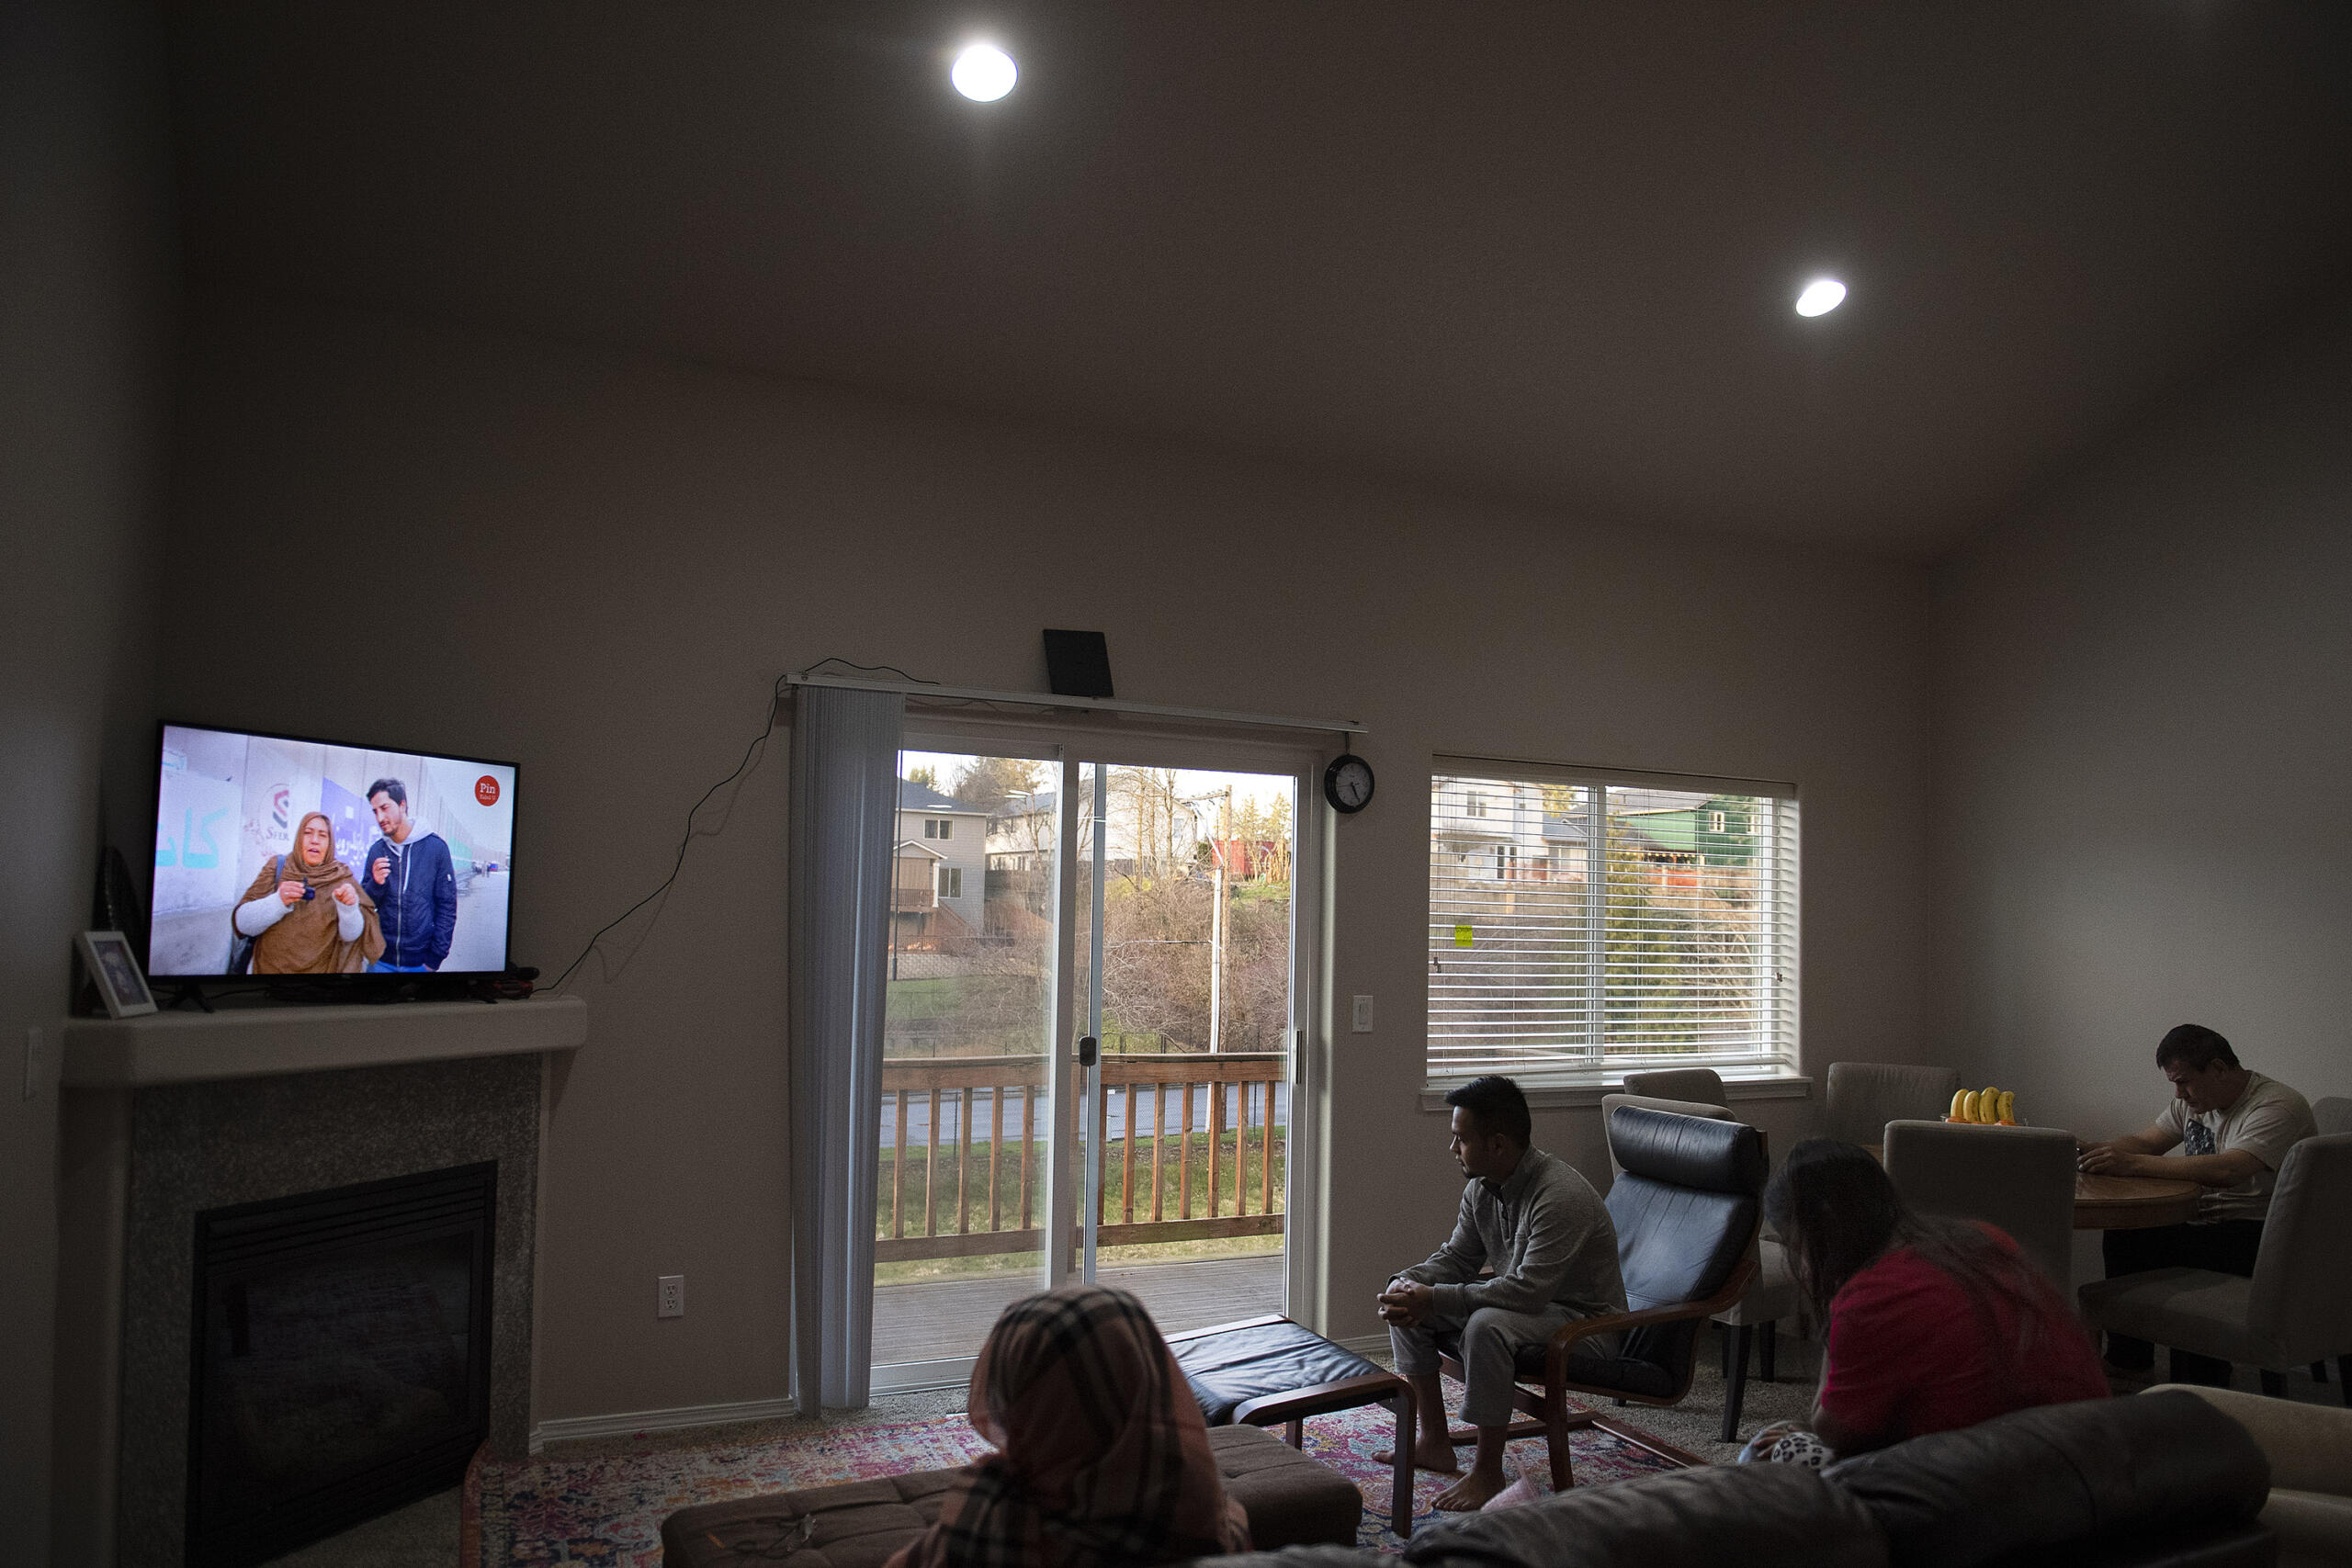 Sediqa Rustami, from left, Sajad Ibrahimi, Marwa Azizpour, and Mohammad Ismail Rezayee gather to watch a television channel from Afghanistan via YouTube on Sunday, Feb. 20, 2022 at their home.